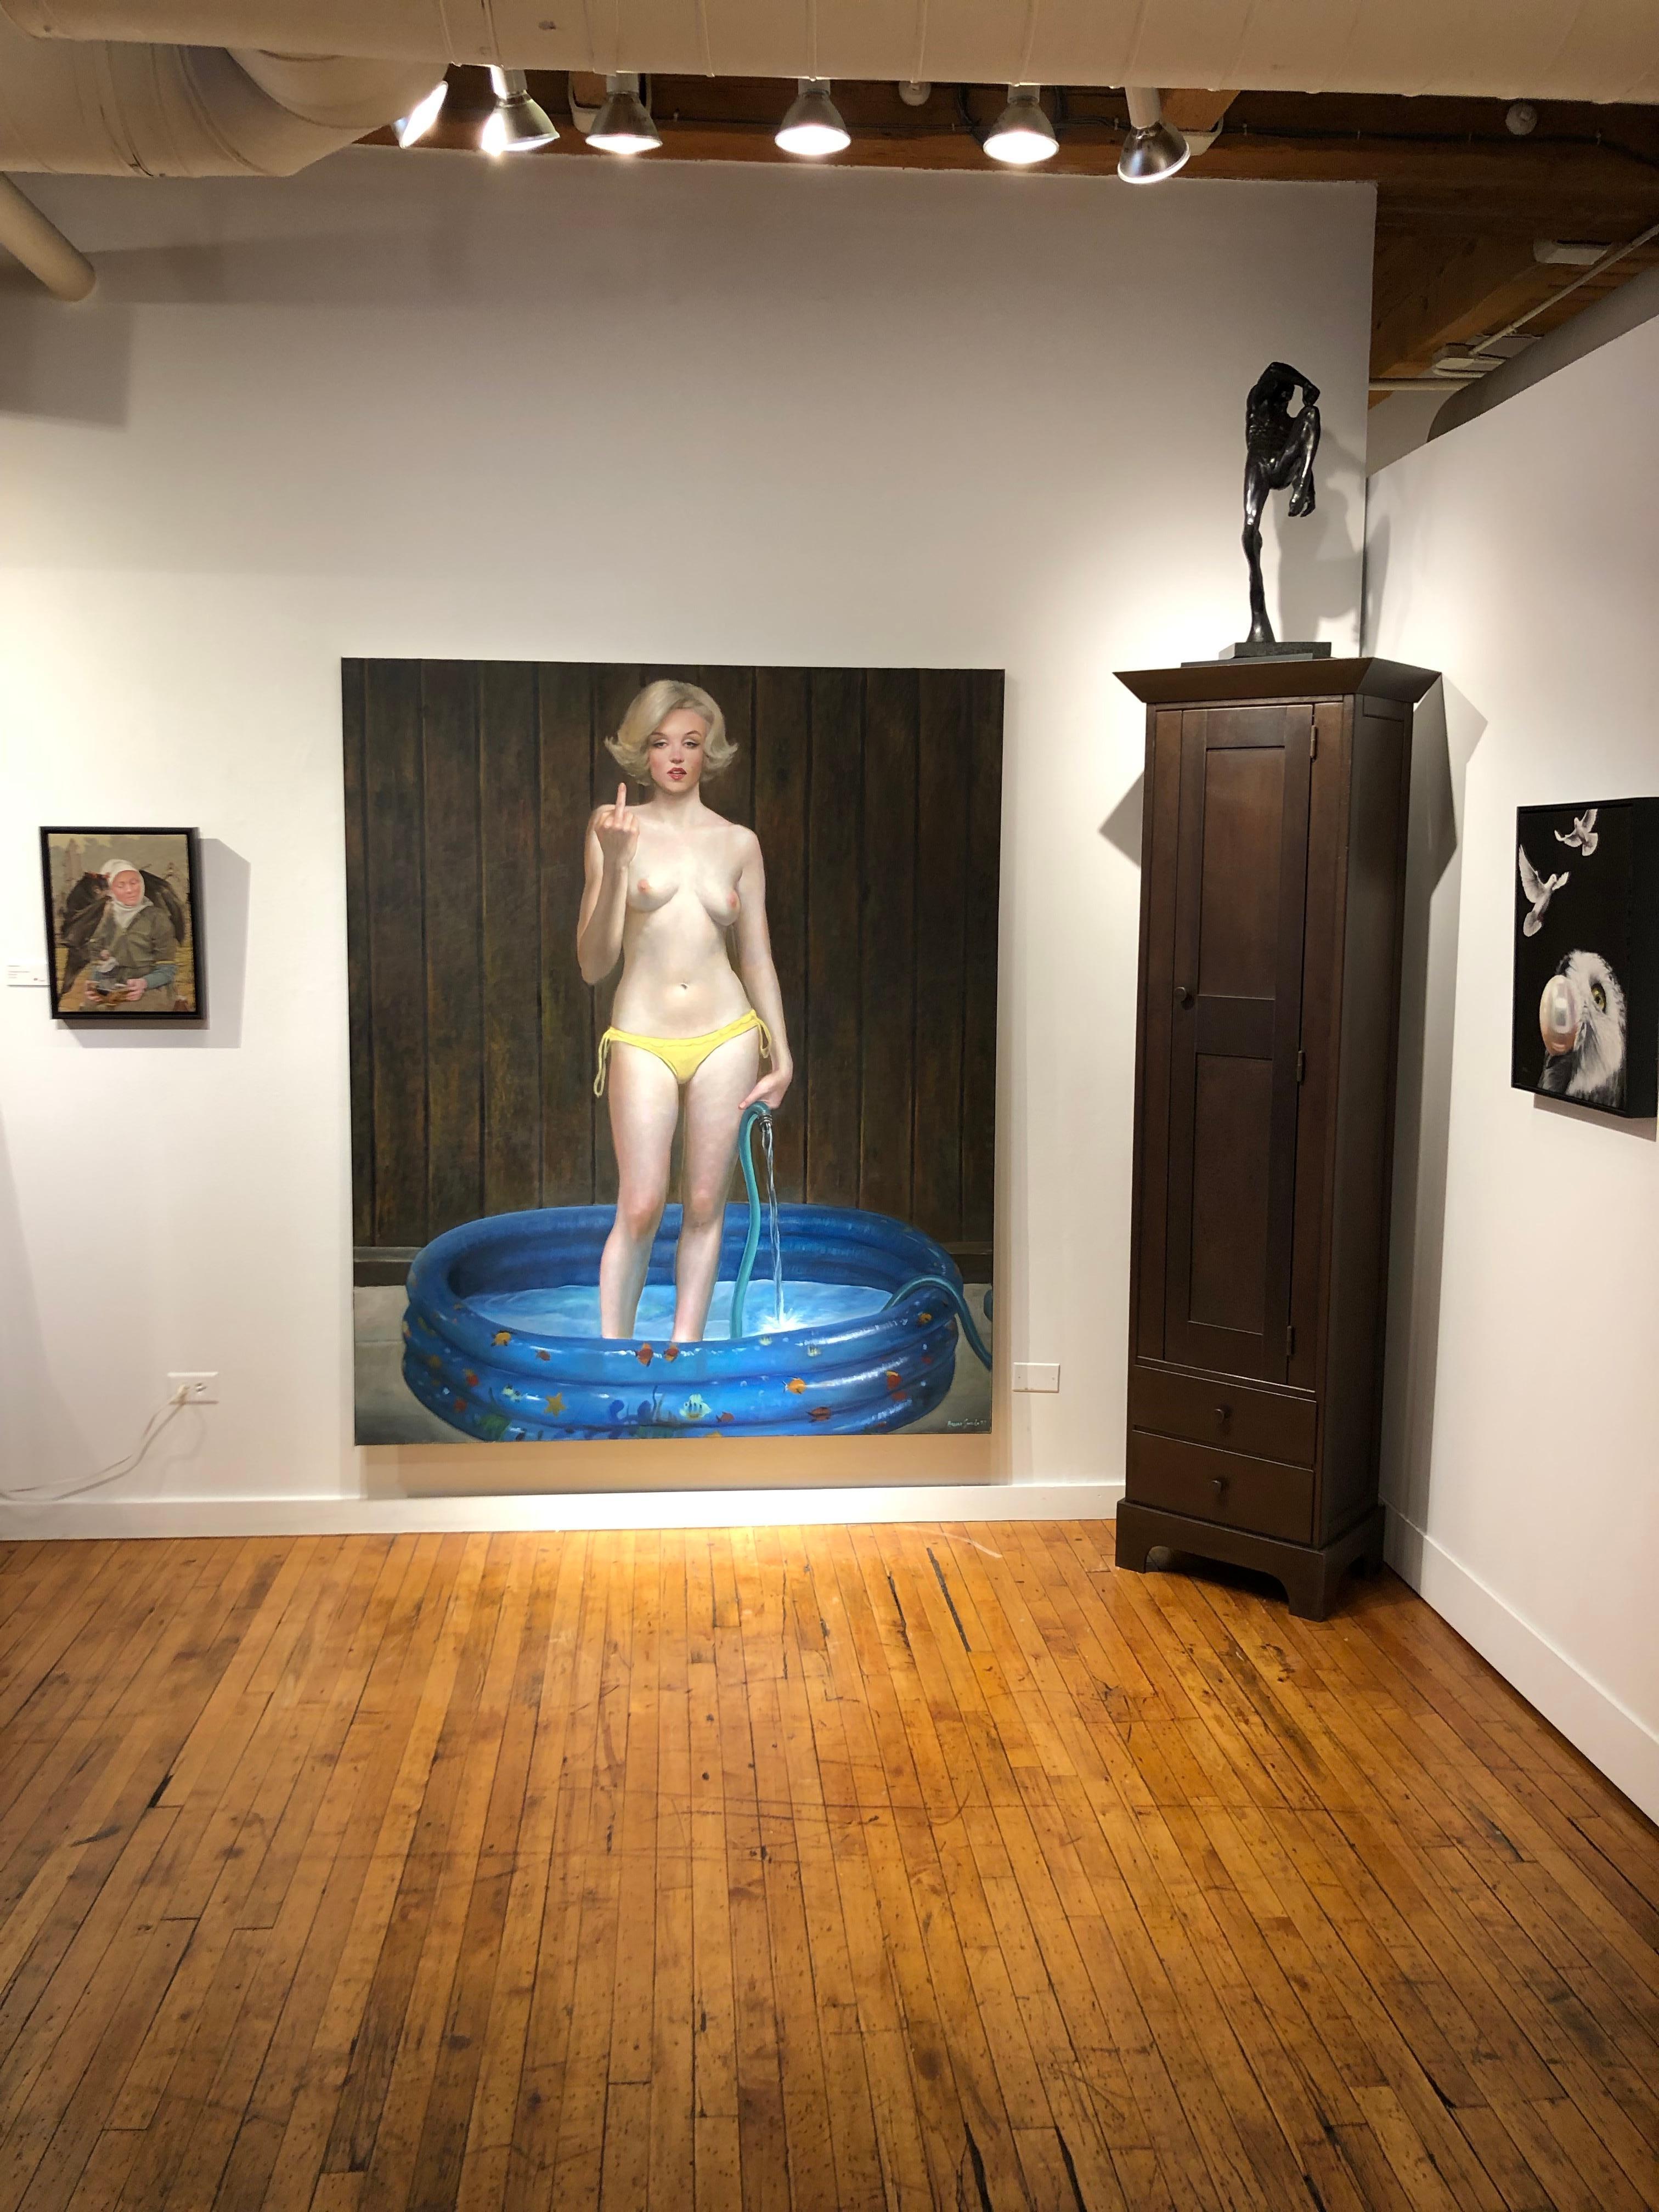 This large scale and beautifully rendered tongue-in-cheek painting of Marilyn Monroe standing nude in a kiddie pool grabs the viewers attention.  Let the discussion begin.

Bruno Surdo
Get Out!
oil on canvas
72h x 60w in
182.88h x 152.40w